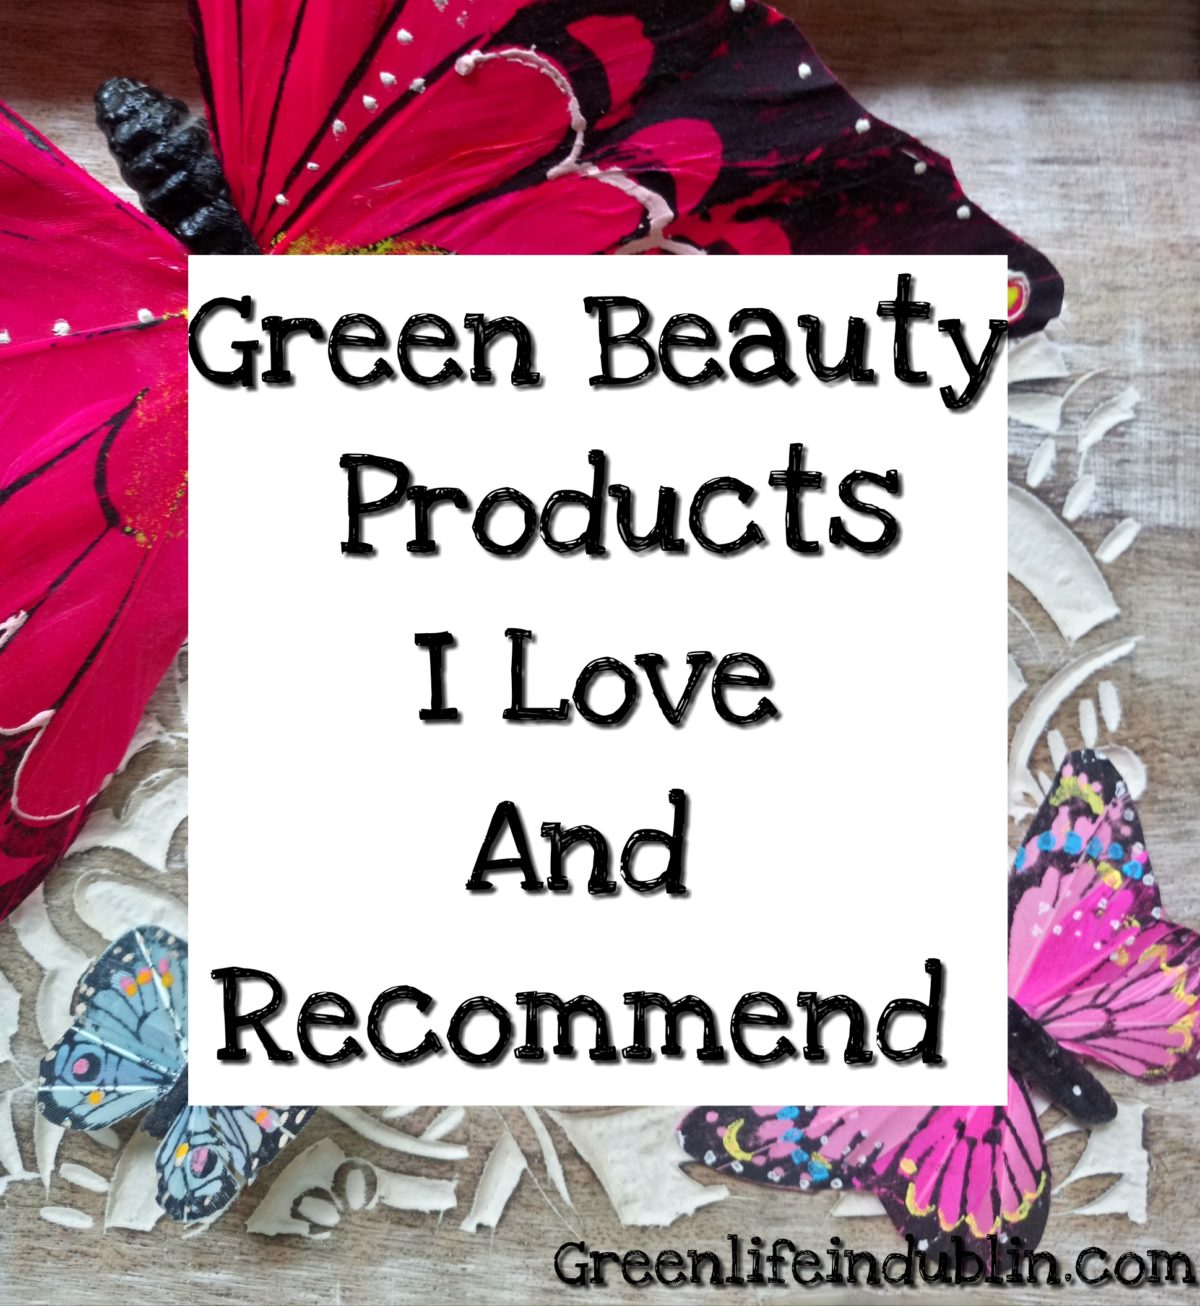 My Favourite Green Beauty Products